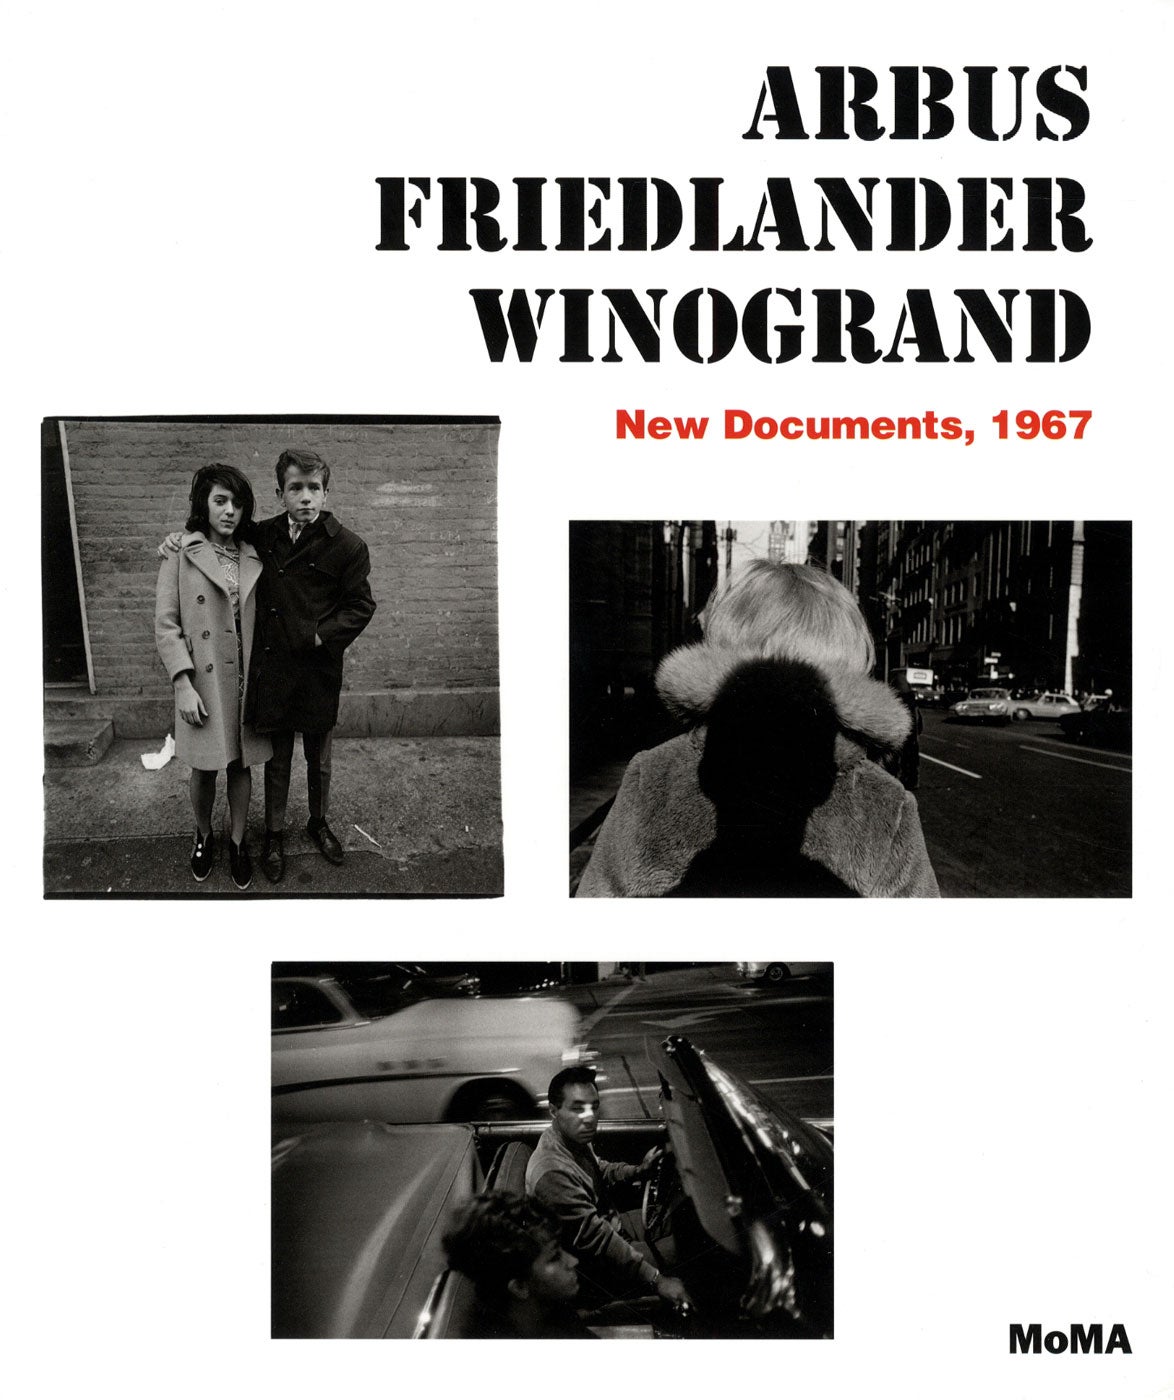 The Man in the Crowd: The Uneasy Streets of Garry Winogrand 